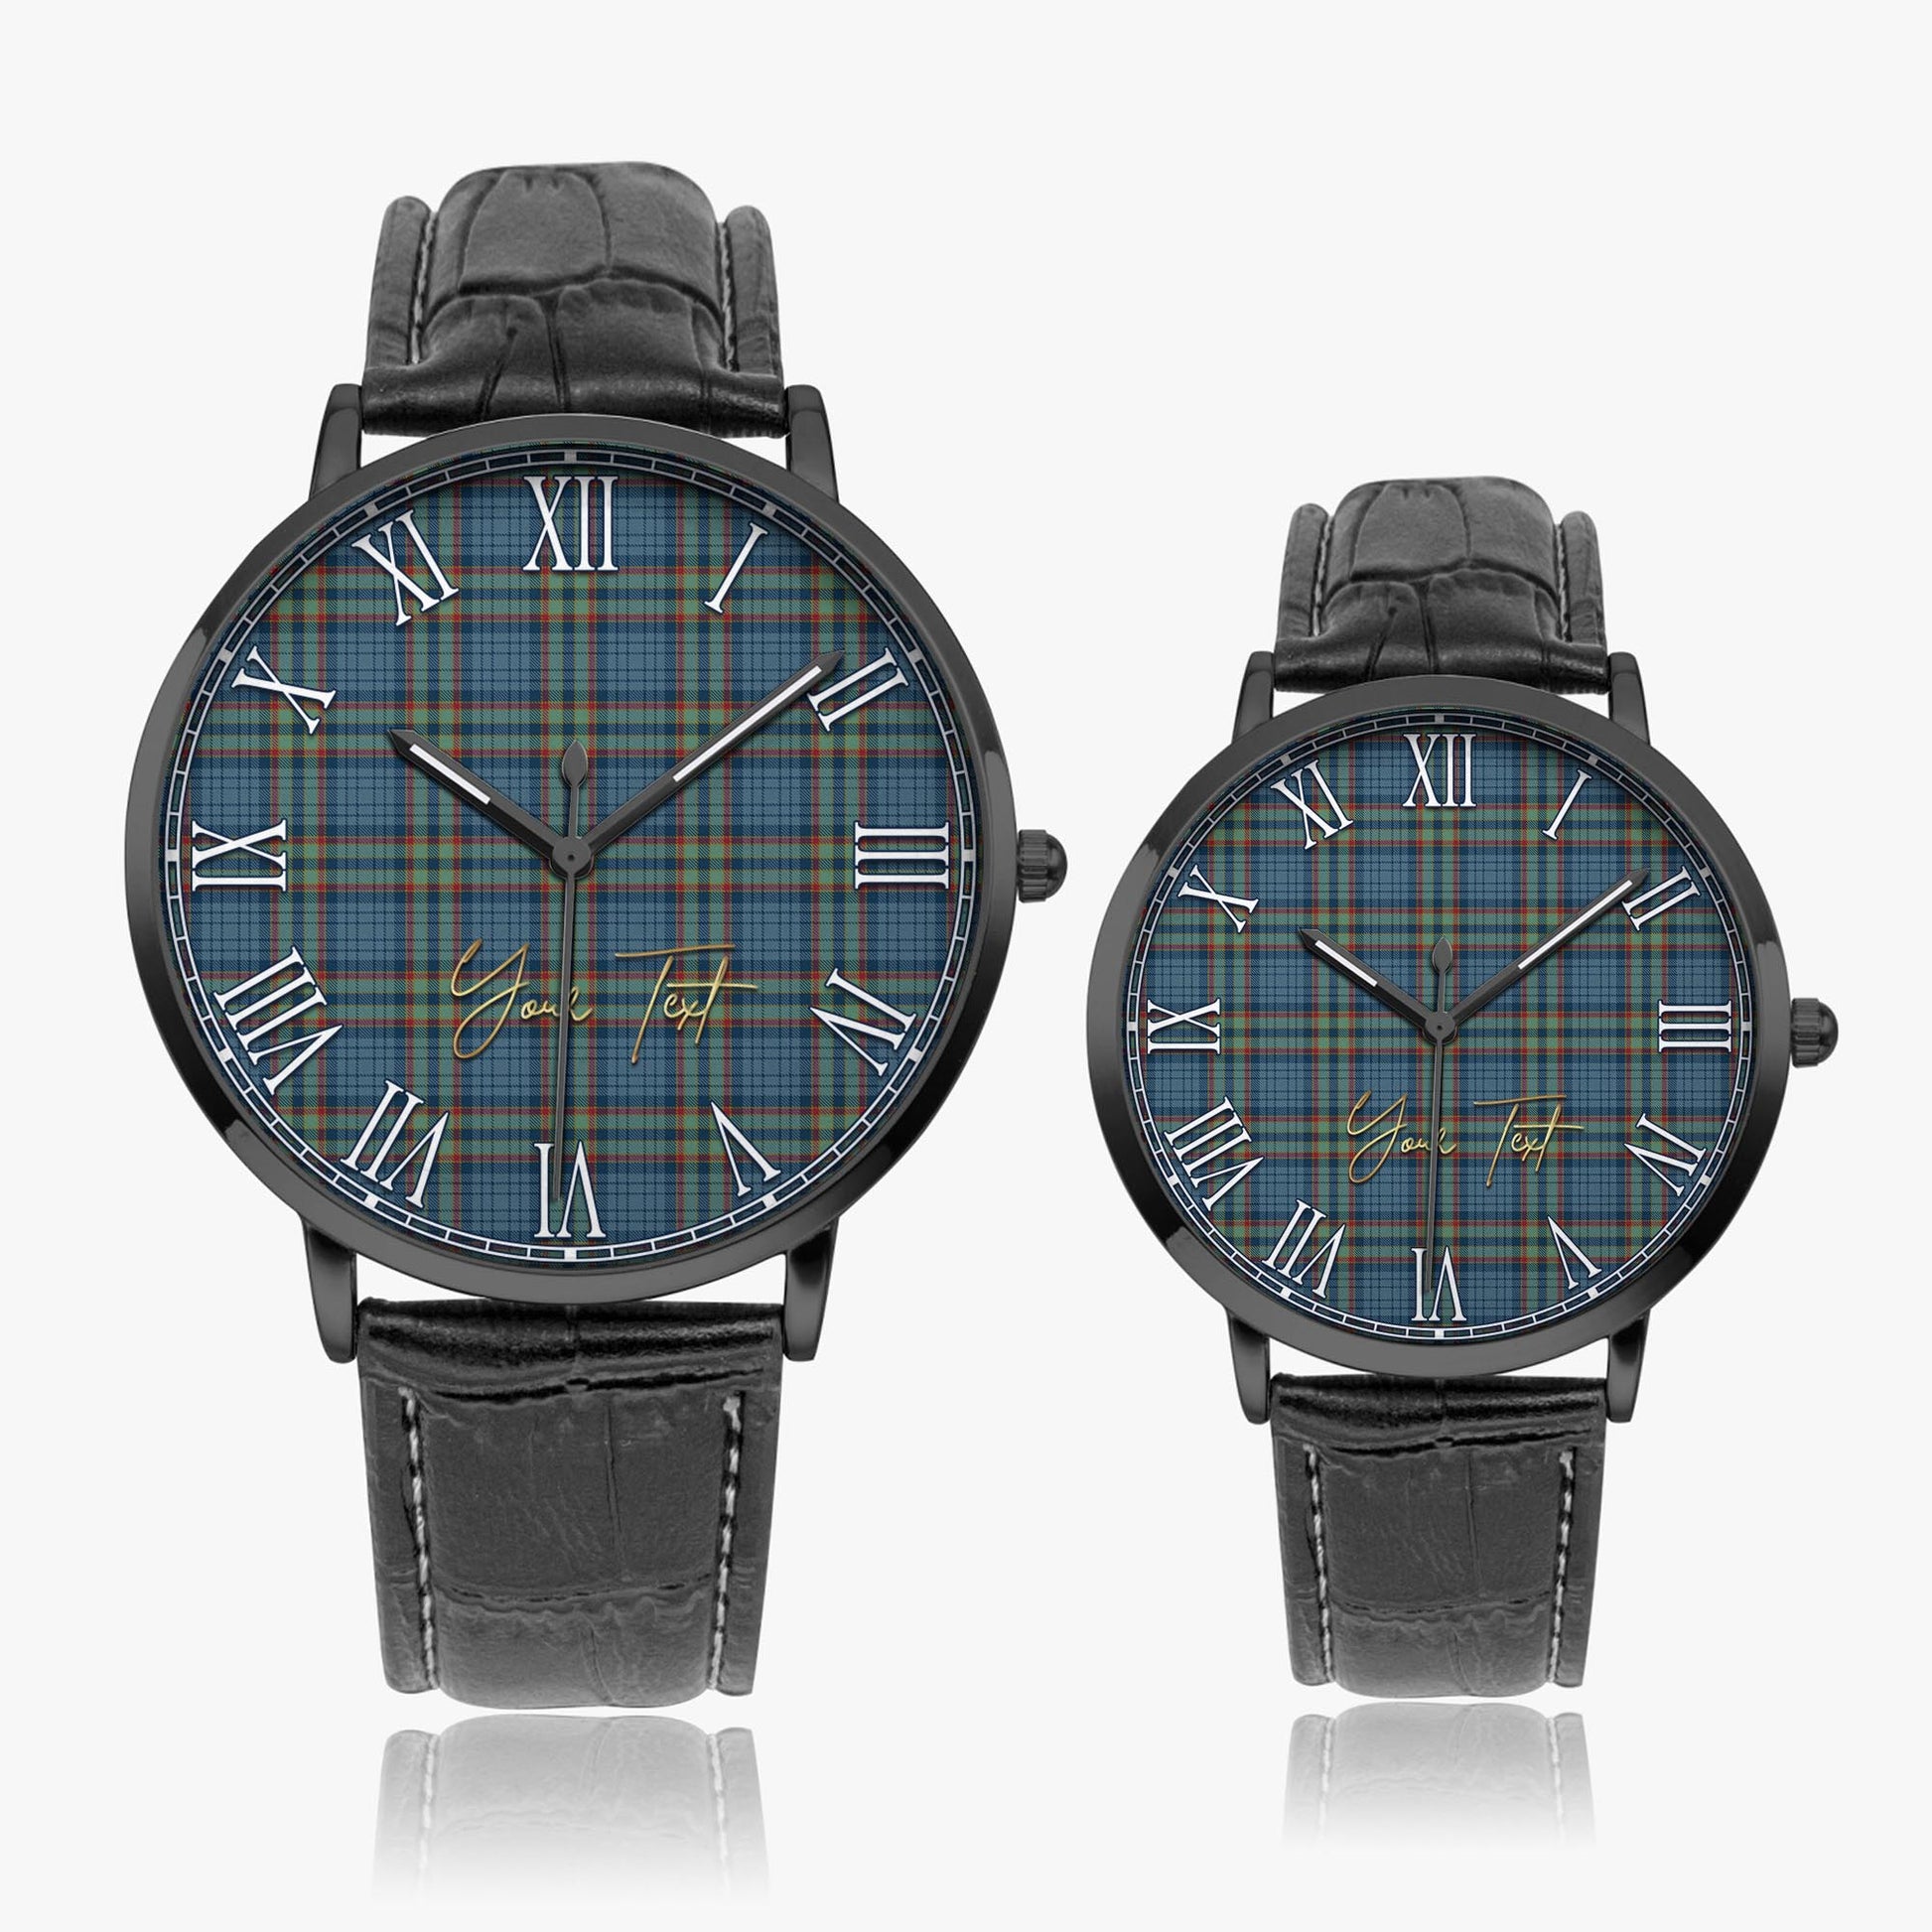 Ralston UK Tartan Personalized Your Text Leather Trap Quartz Watch Ultra Thin Black Case With Black Leather Strap - Tartanvibesclothing